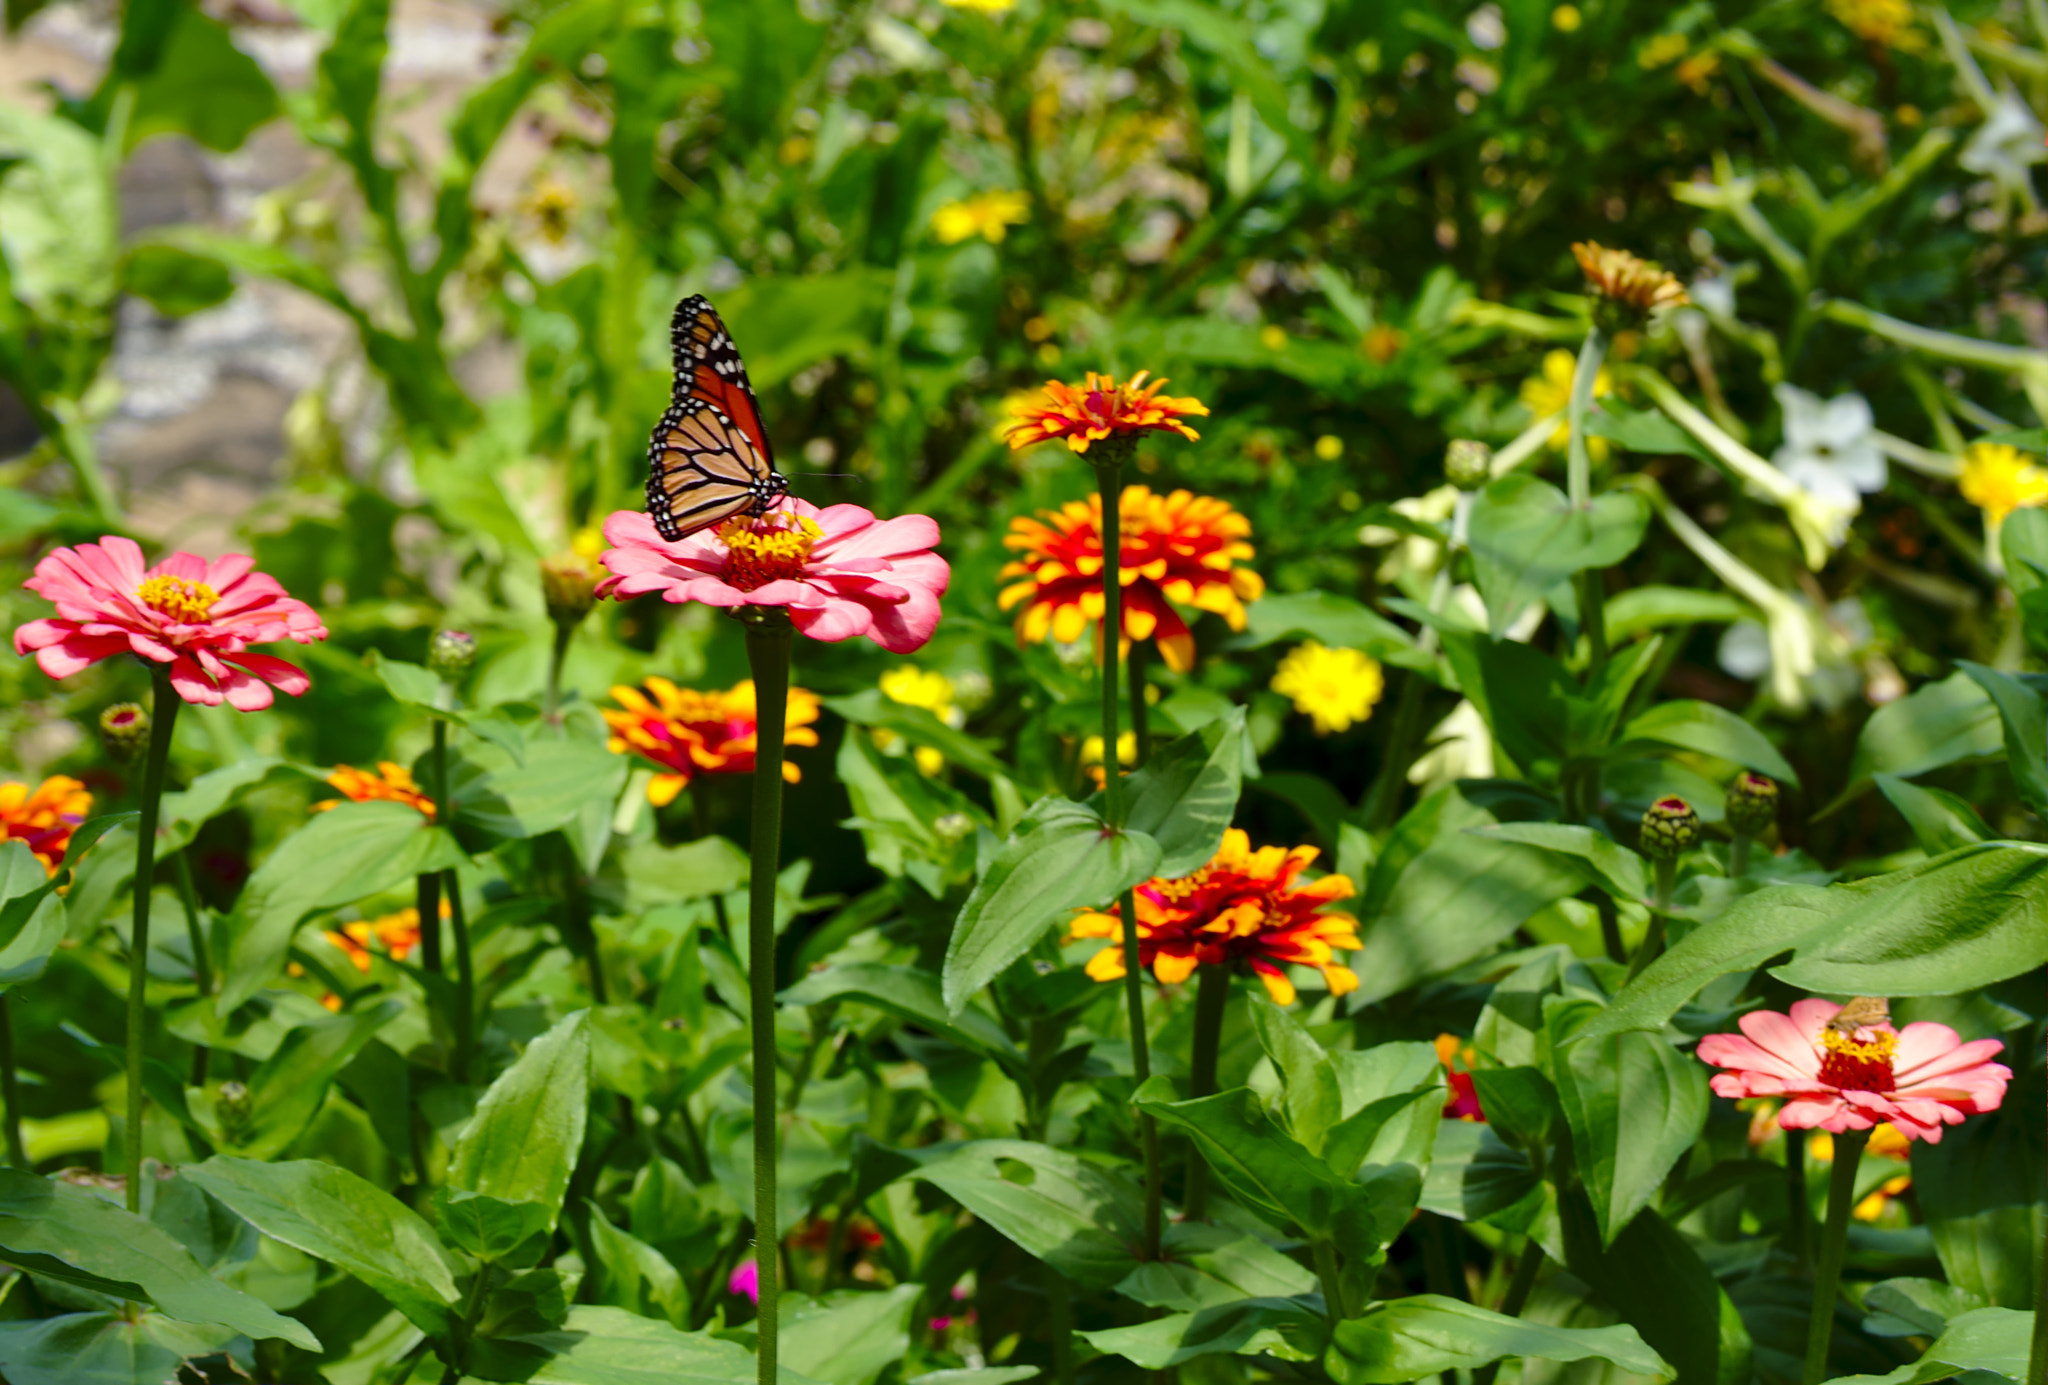 ZEISS Otus 85mm F1.4 sample photo. Monarch butterfly on daisies photography